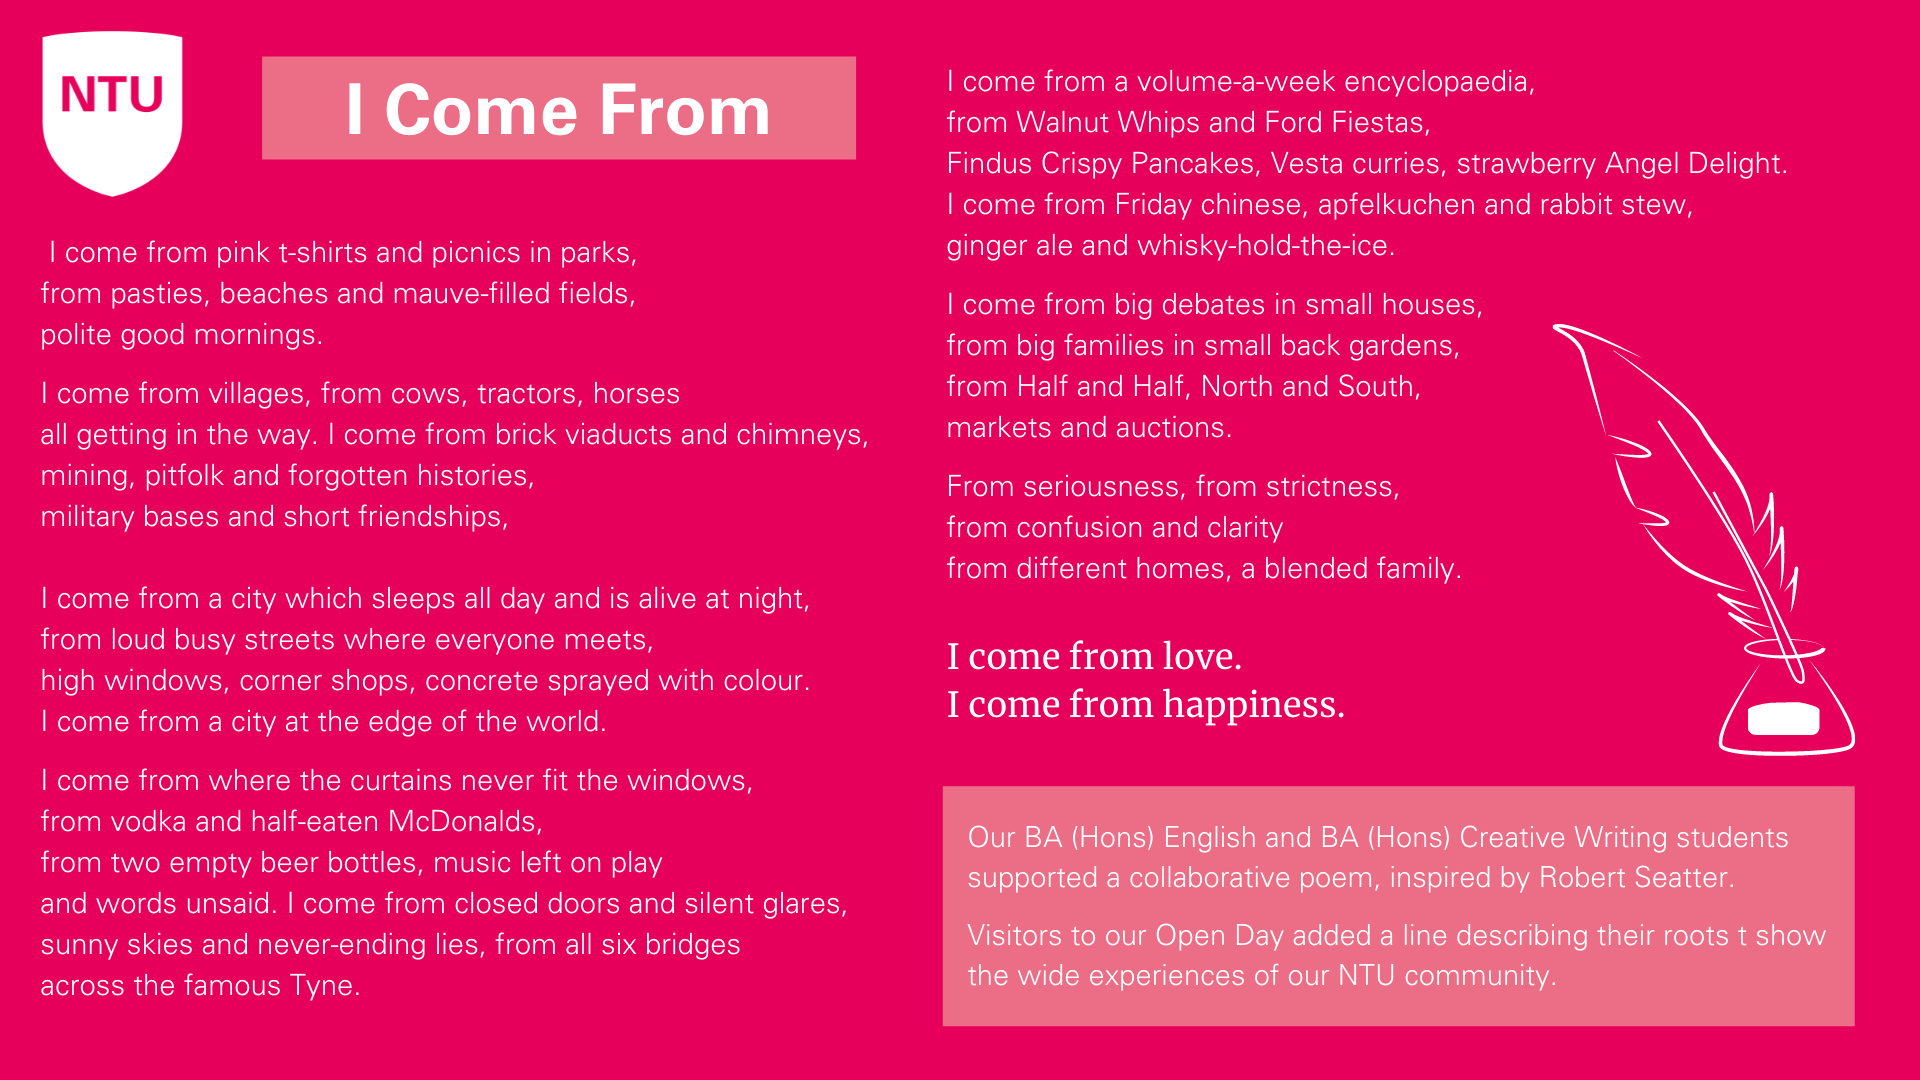 I Come From, an Open day Poem